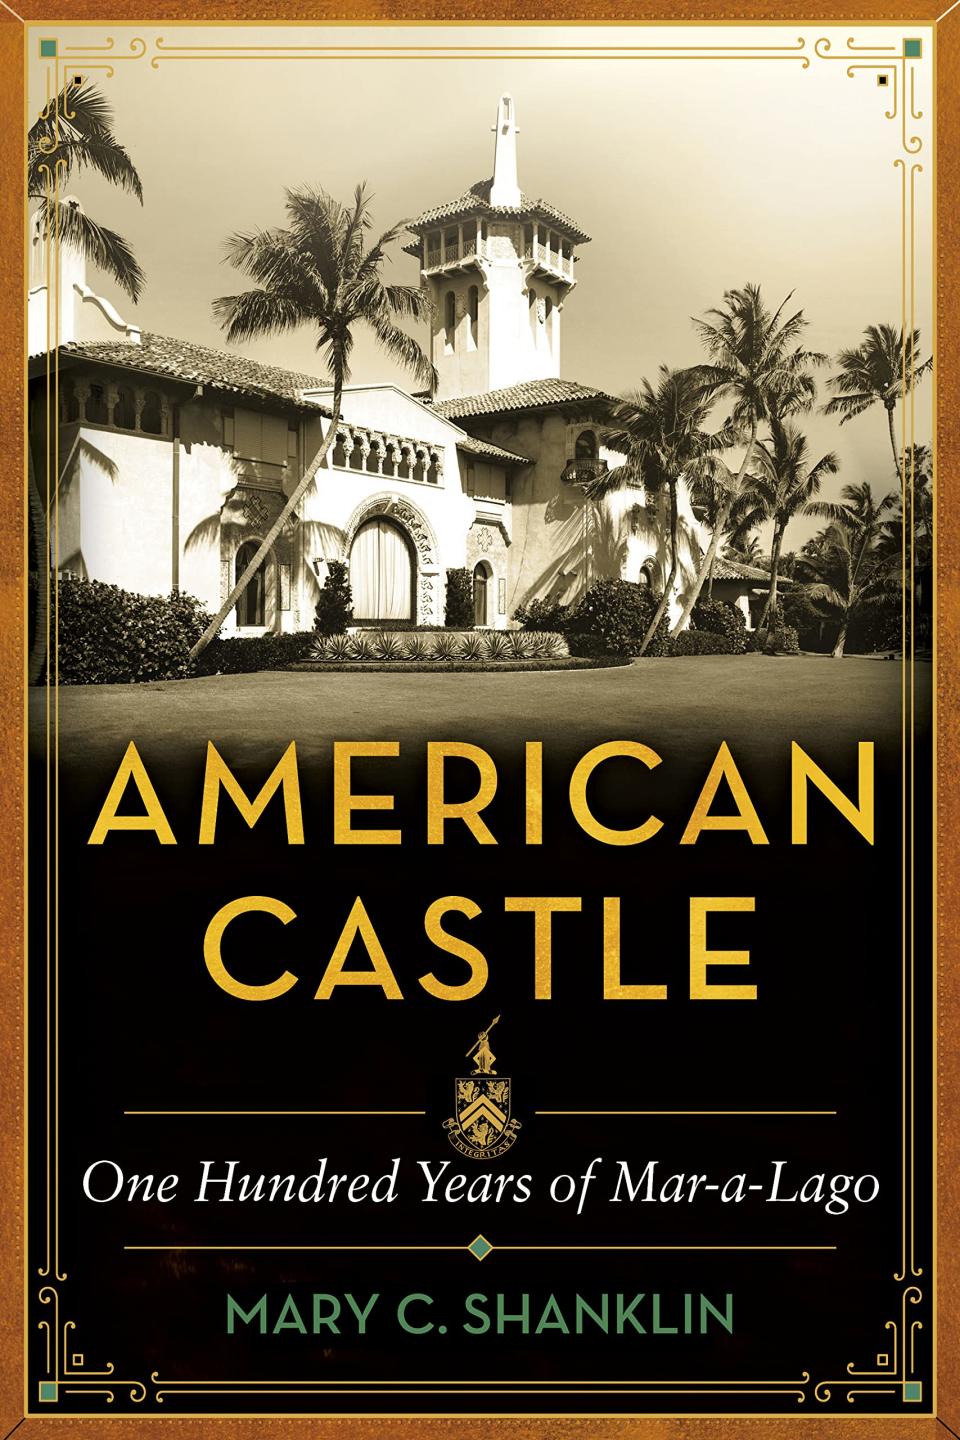 "American Castle," by Mary Shanklin, takes a detailed look at Mar-a-Lago's history.